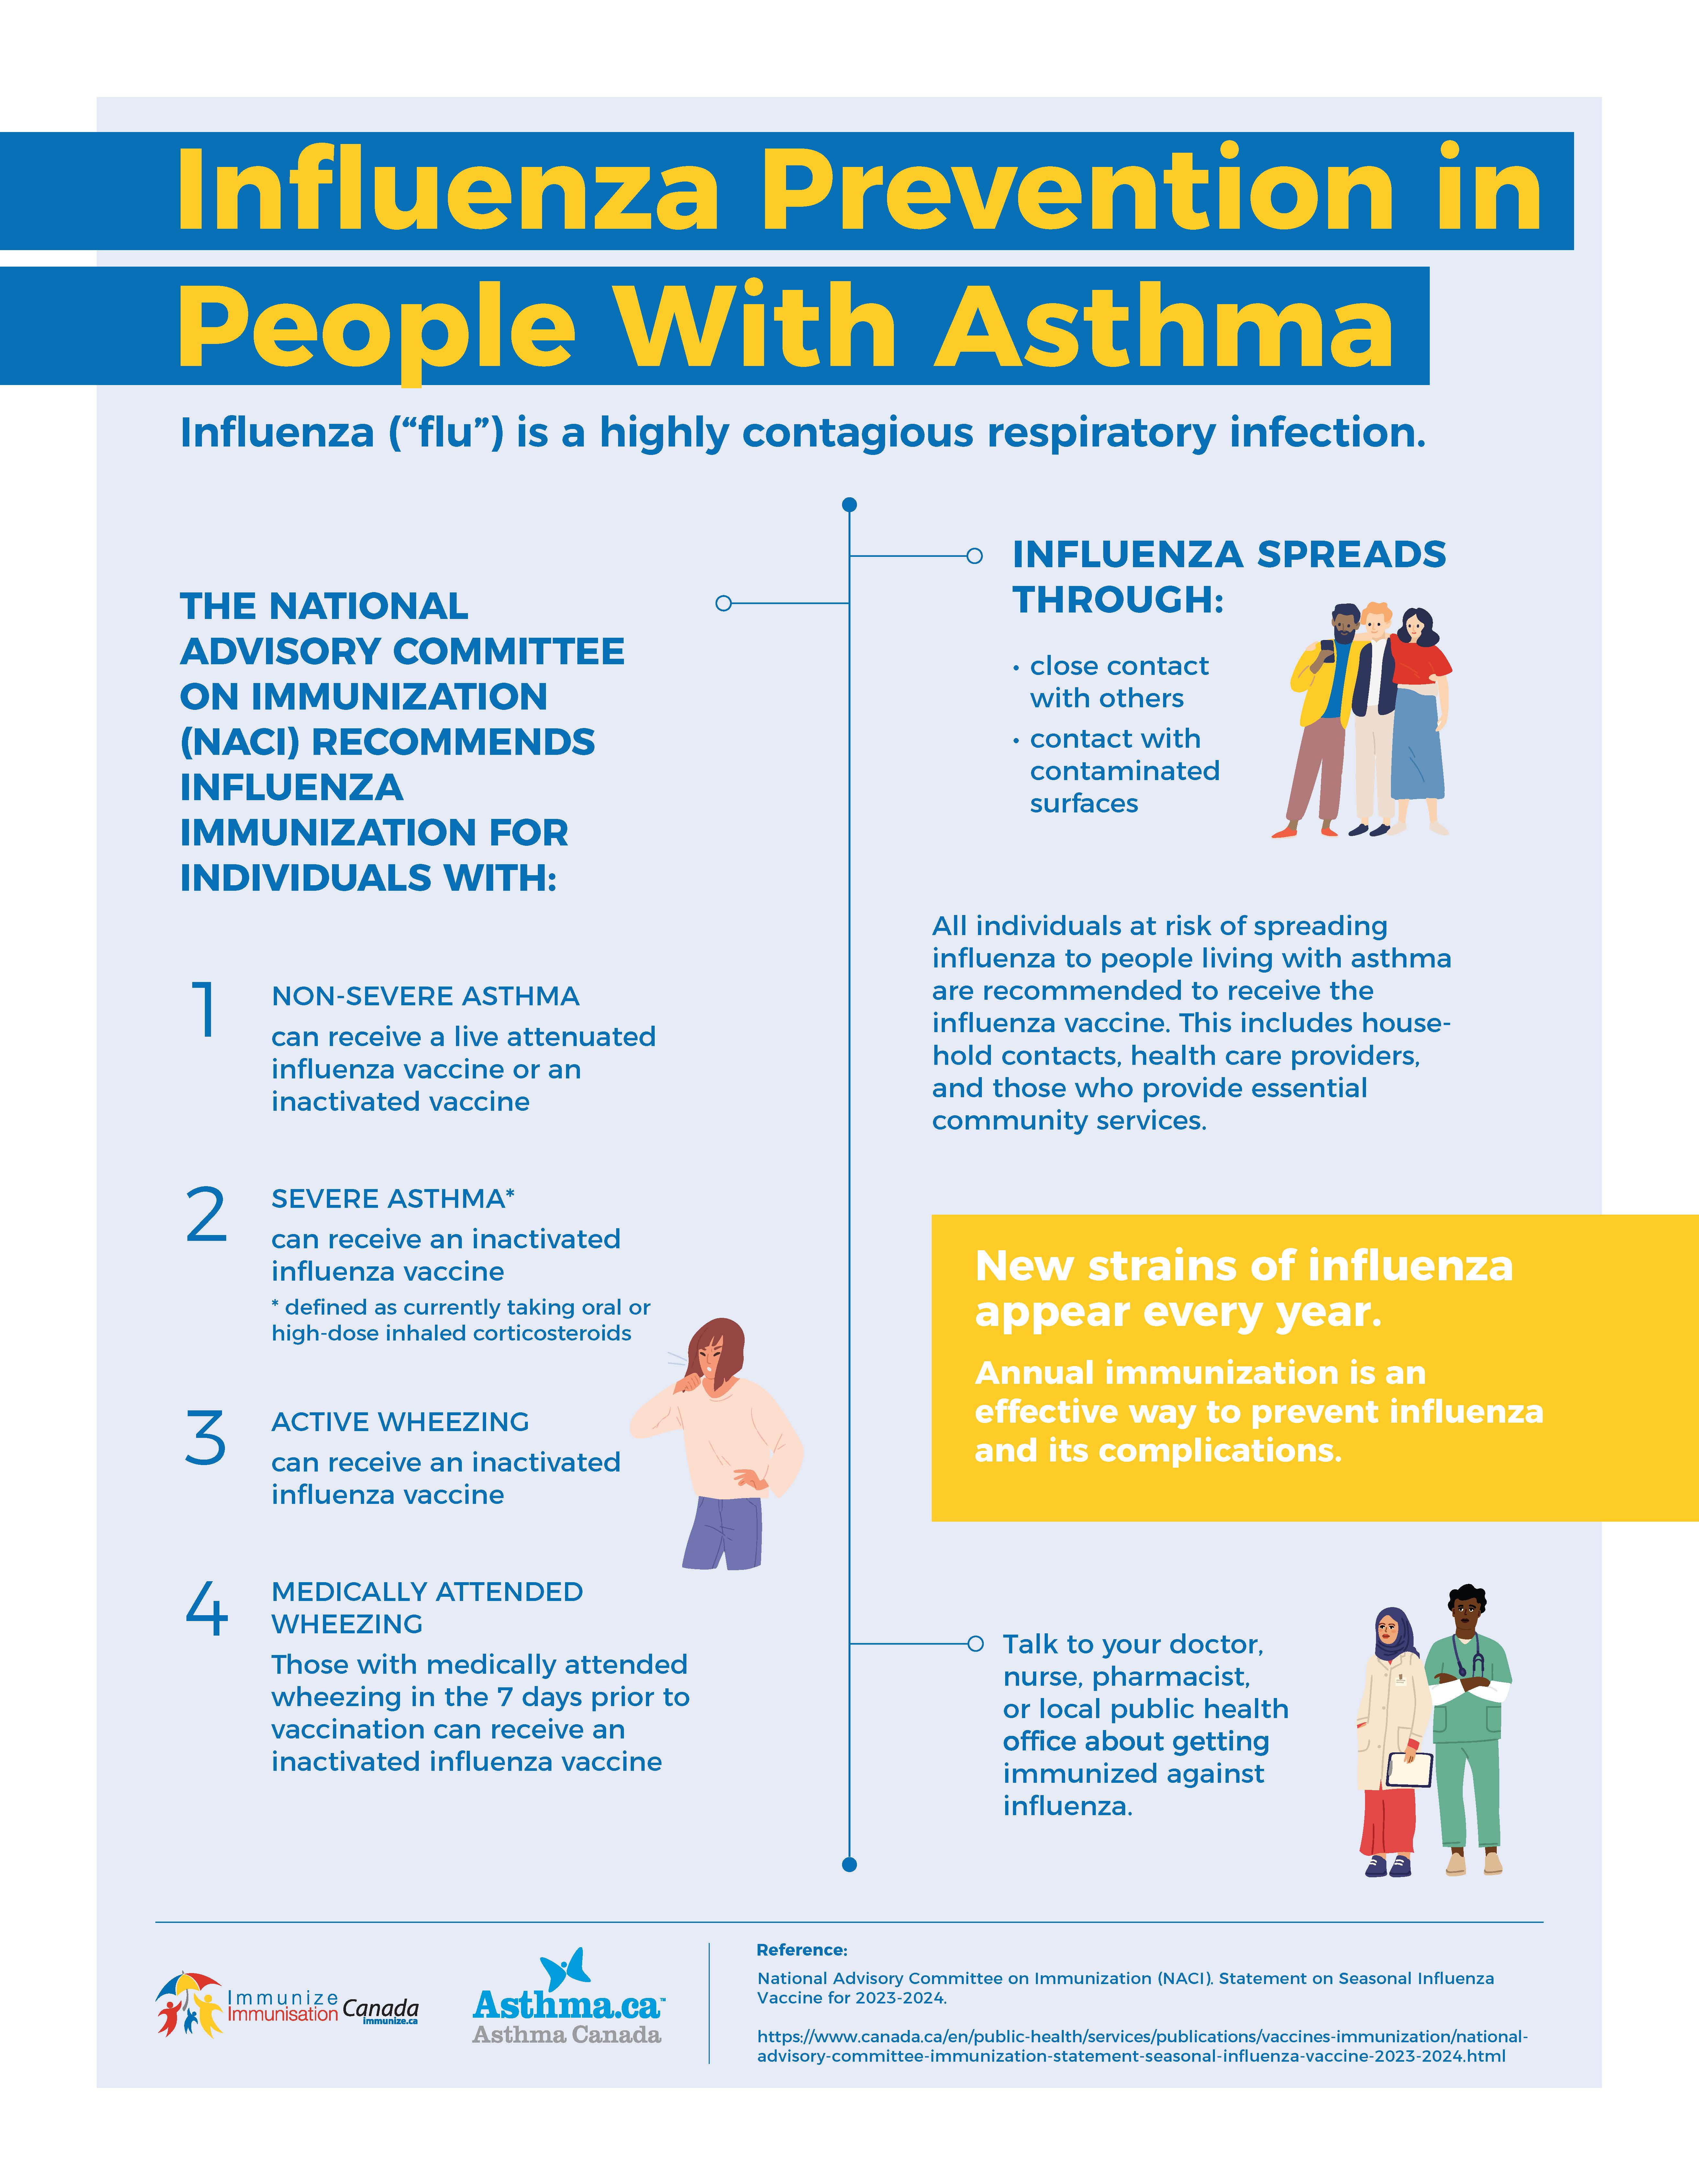 Influenza Prevention in People with Asthma - infographic